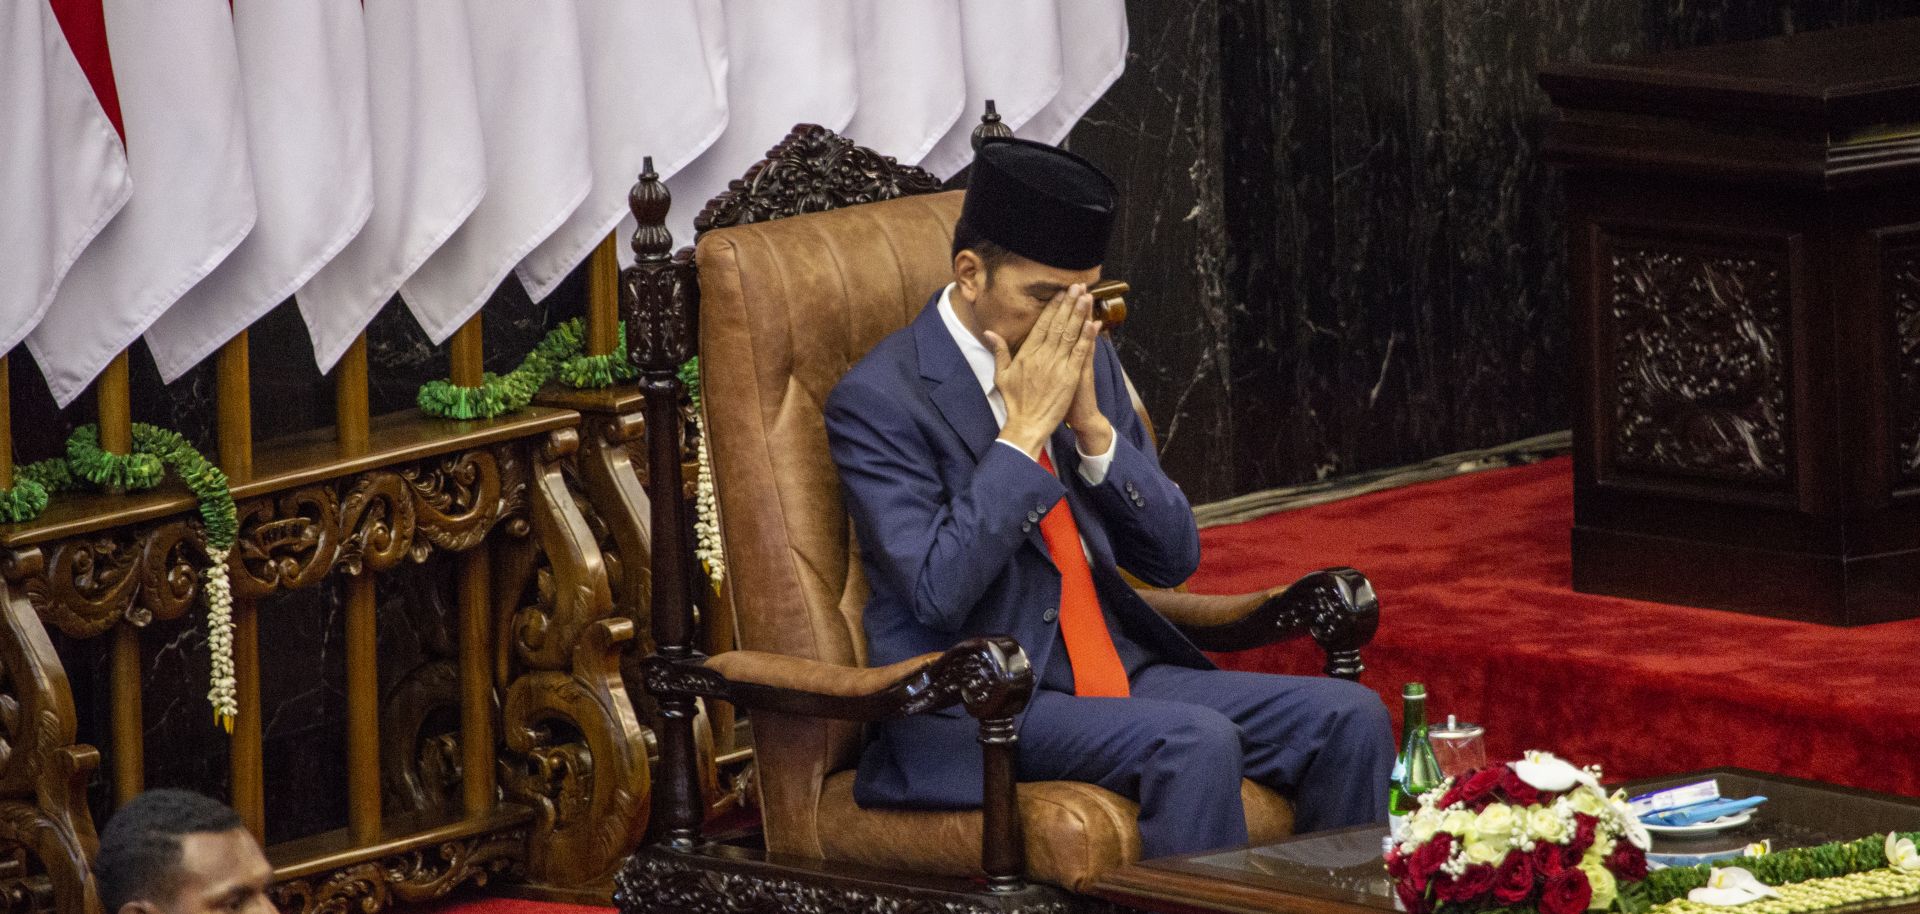 Indonesian President Joko "Jokowi" Widodo prays during his inauguration for his second term on Oct. 20, 2019, in Jakarta.